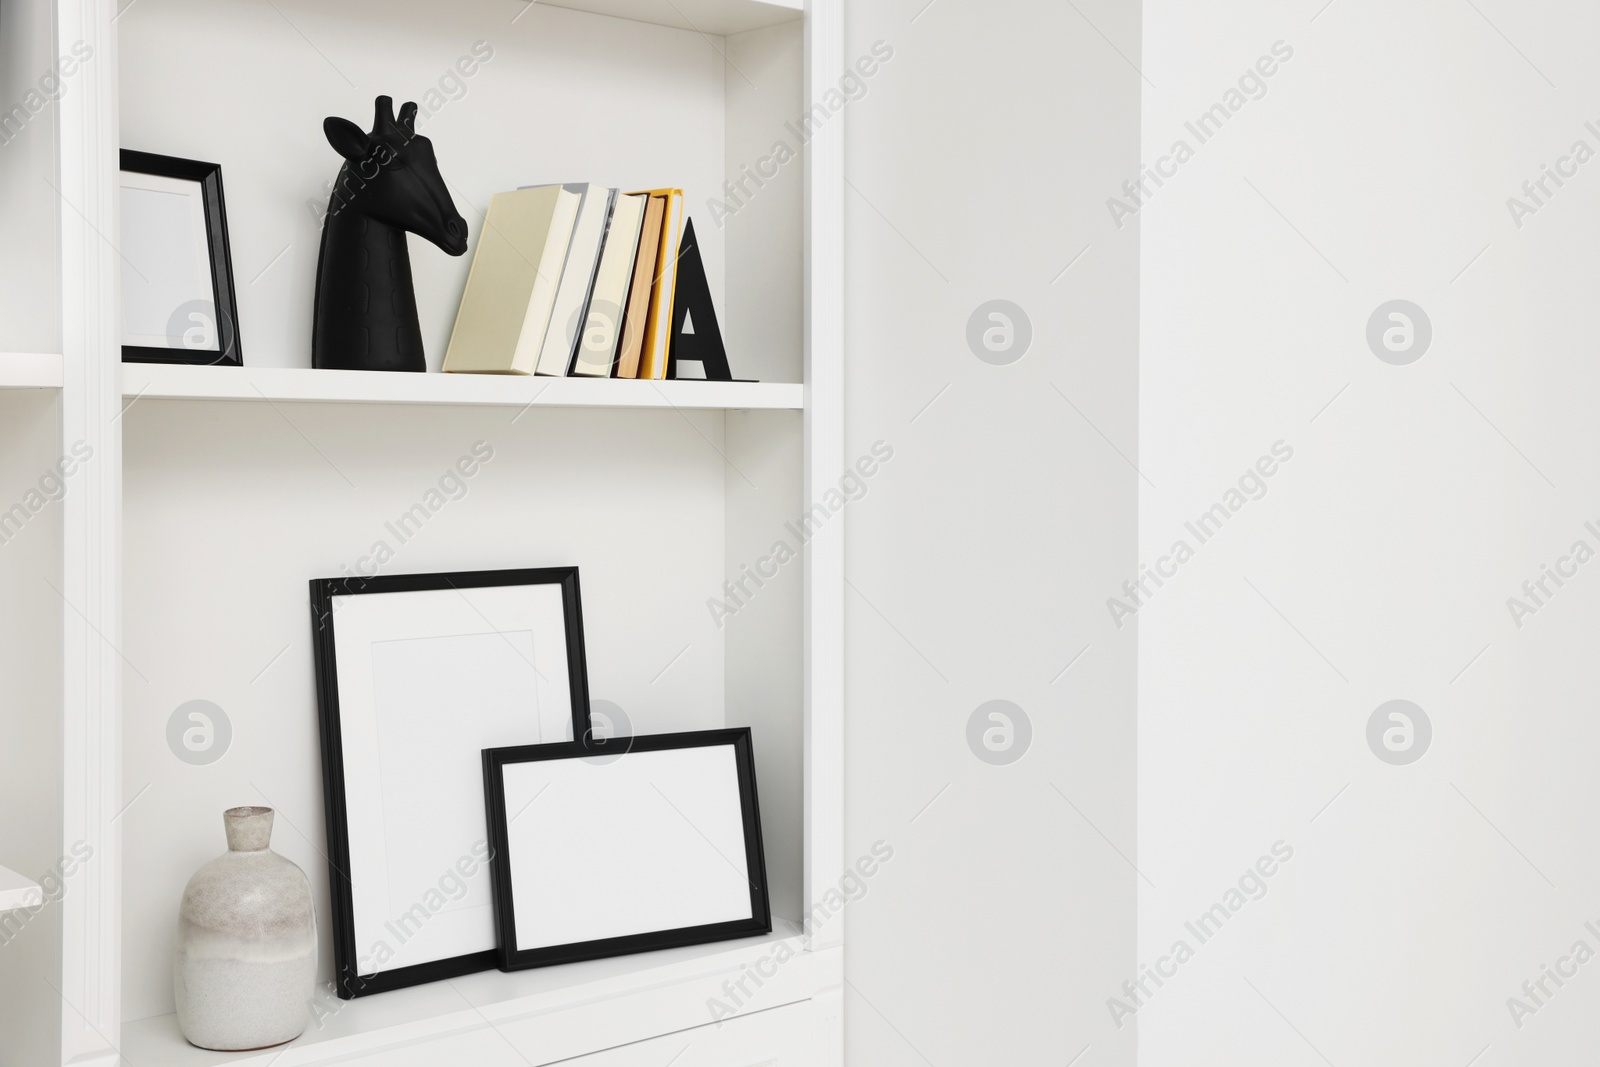 Photo of Books, frames and different decorative elements on shelving unit indoors, space for text